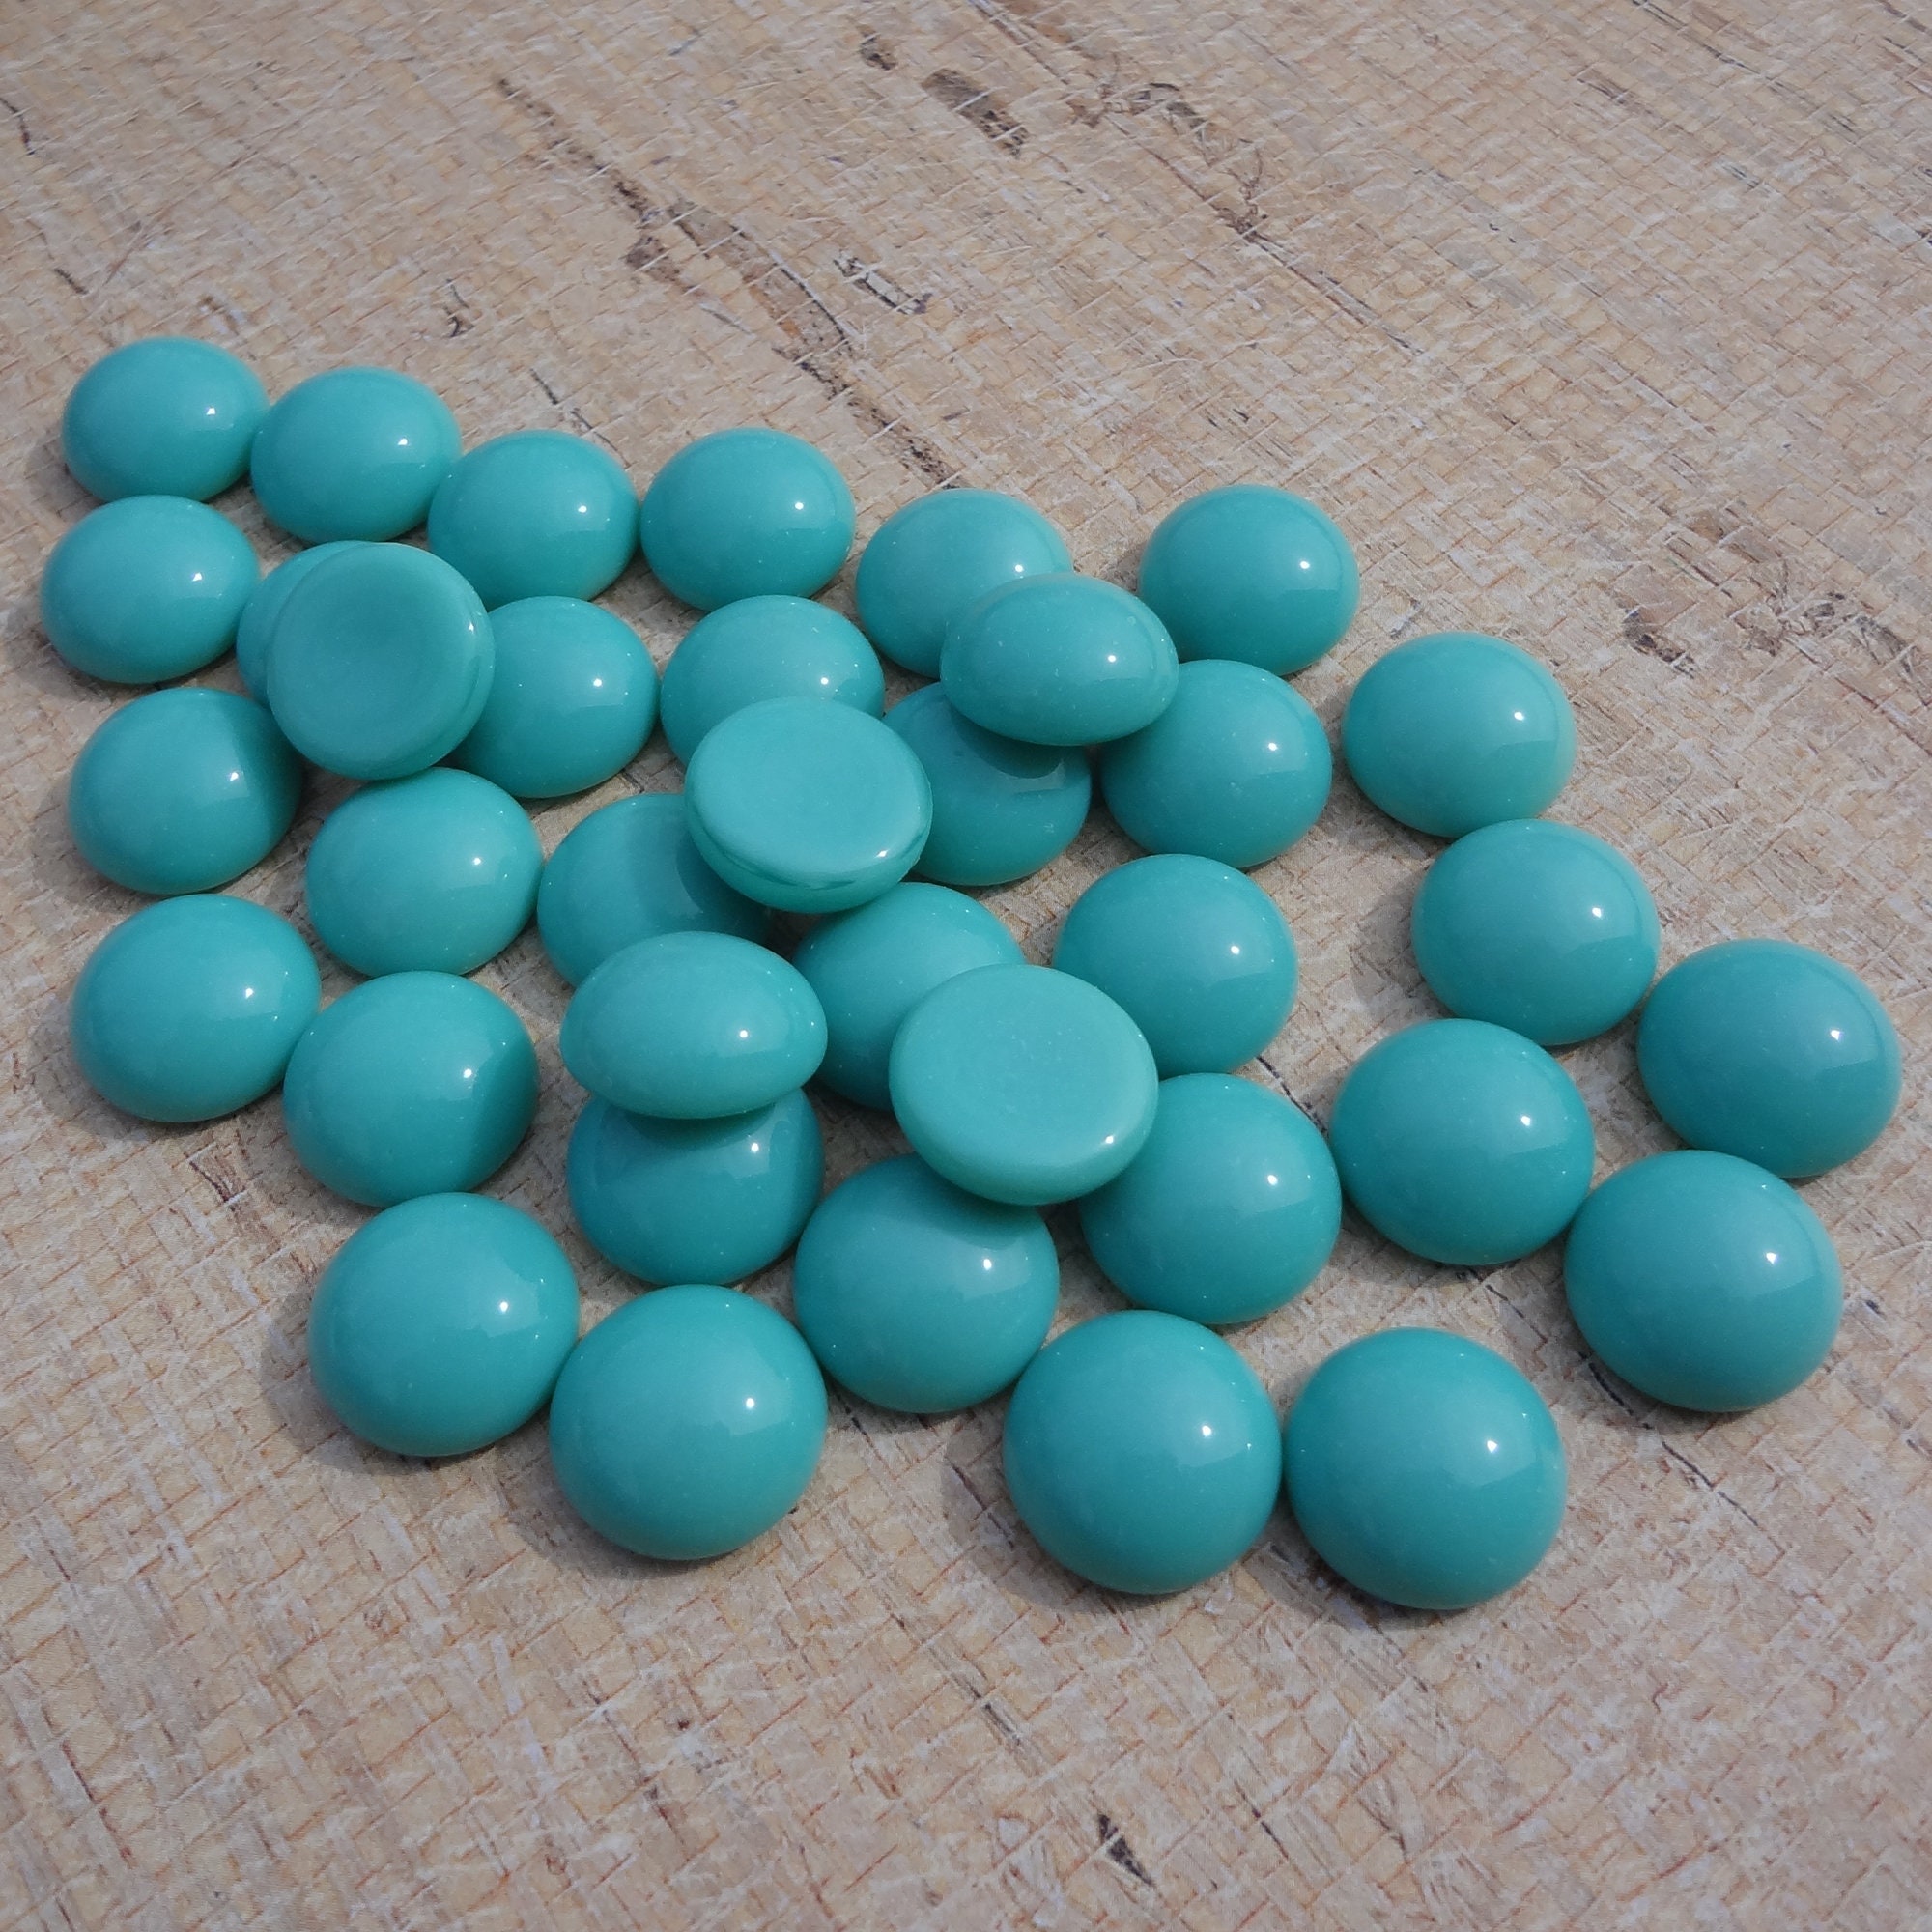 Blue or White Howlite Turquoise Cross Beads 12x16mm 15.5 Strand